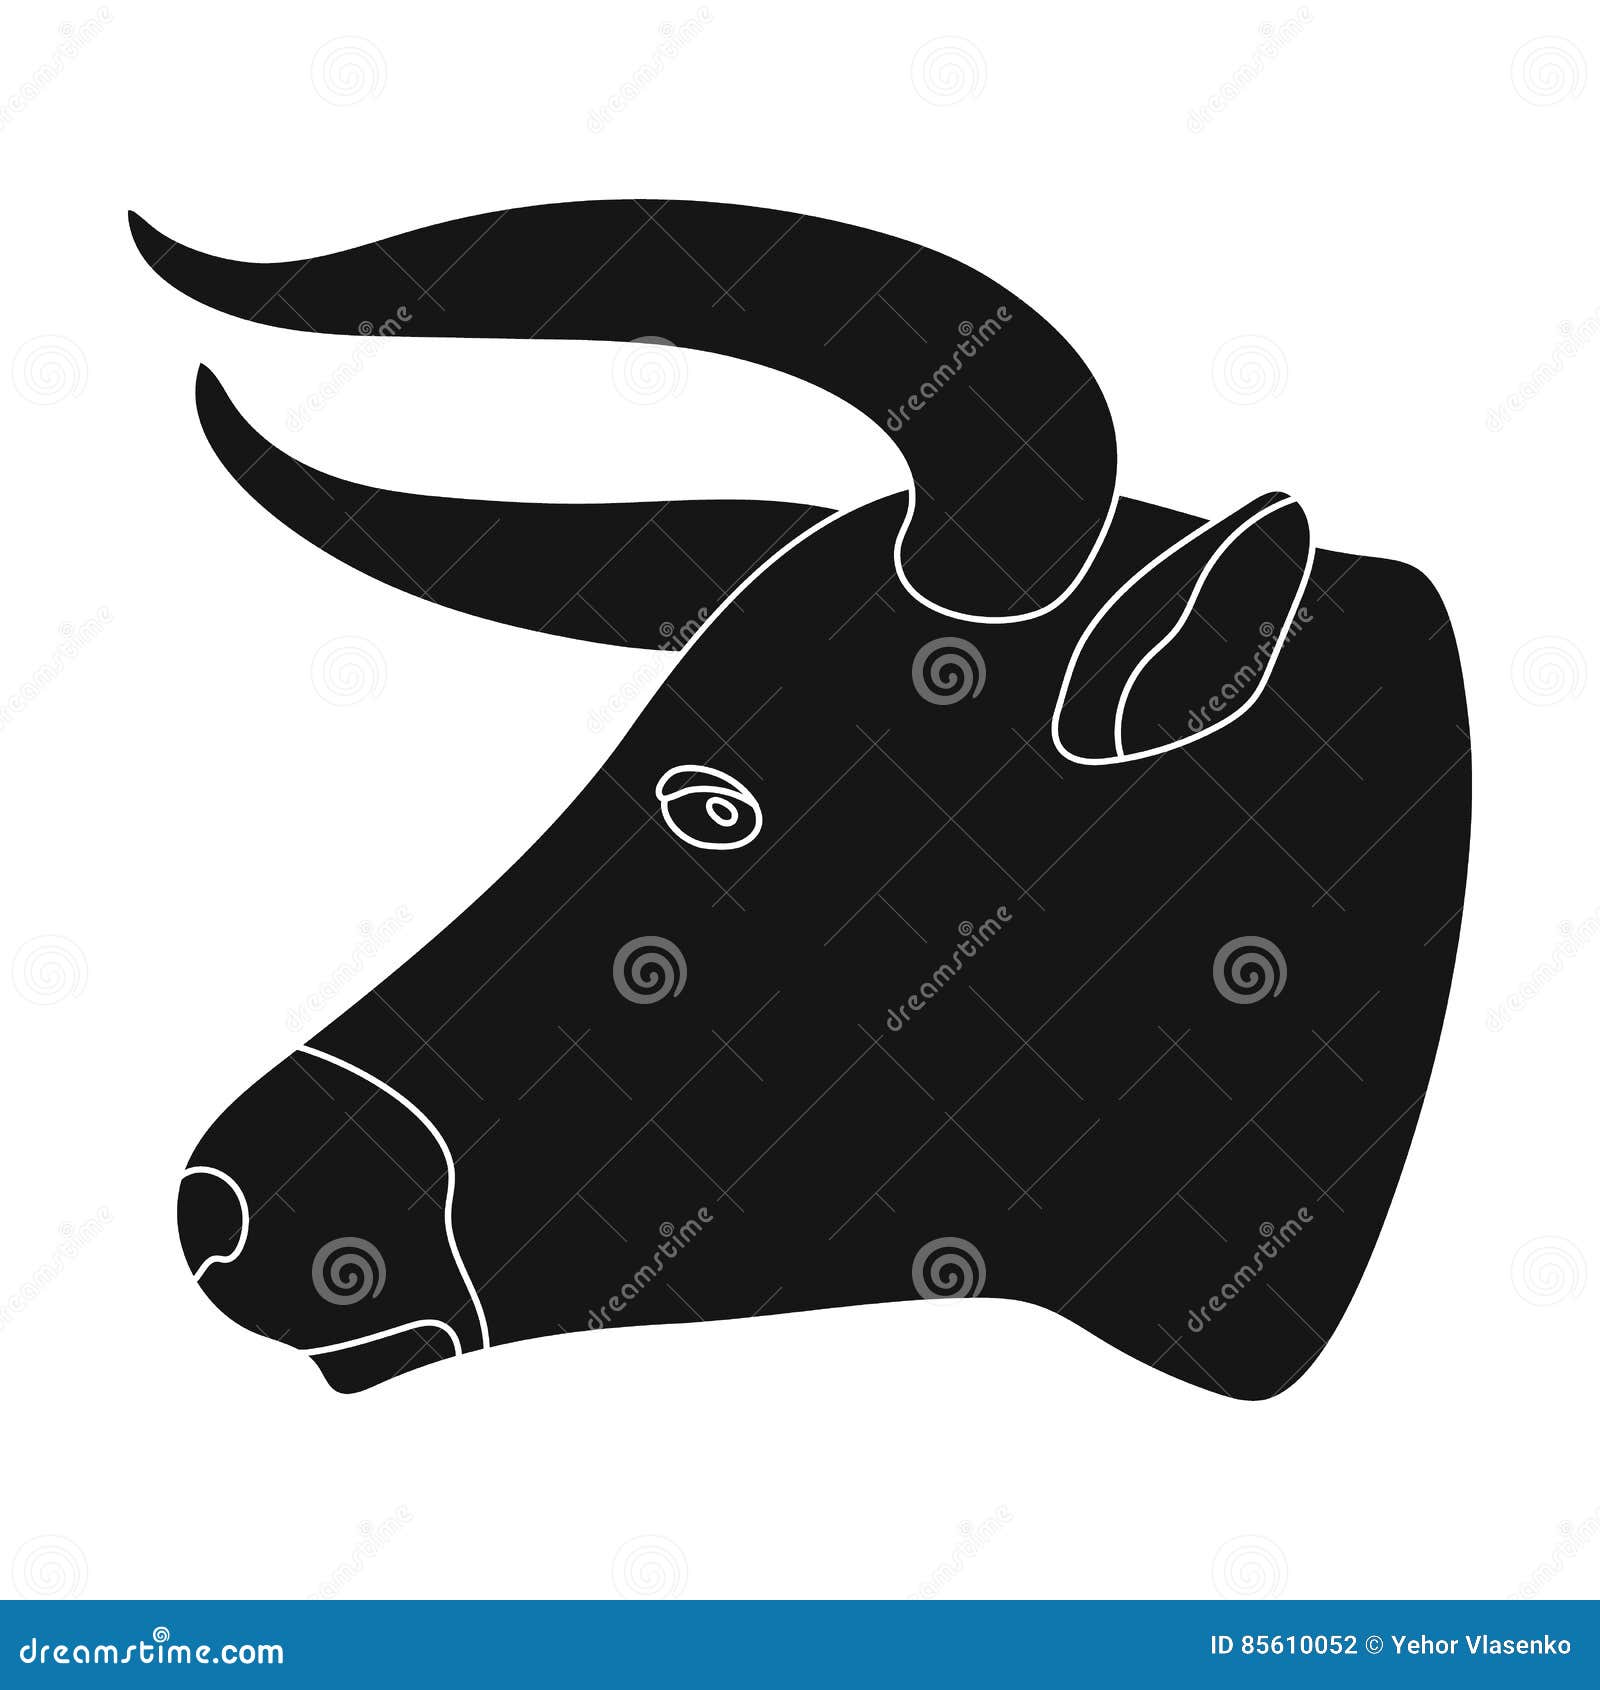 Head Of Bull Icon In Monochrome Style Isolated On White Background